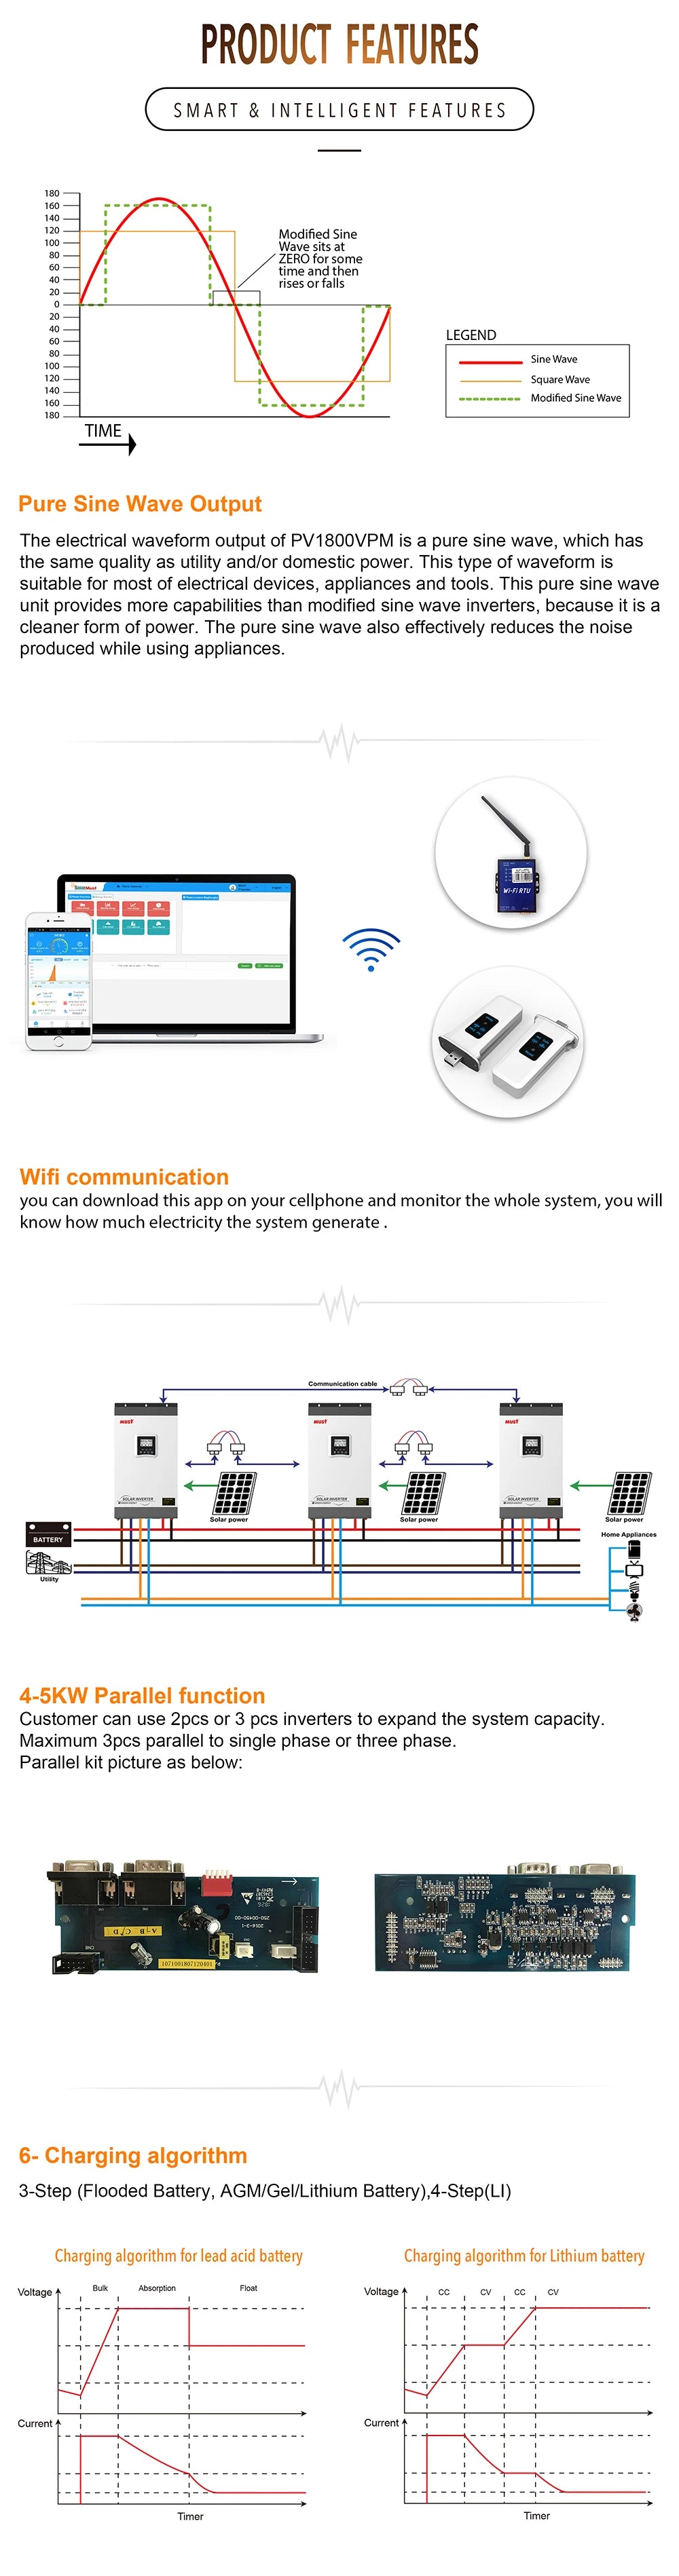 High-frequency solar inverter with built-in charge controller and WiFi connectivity for off-grid homes.